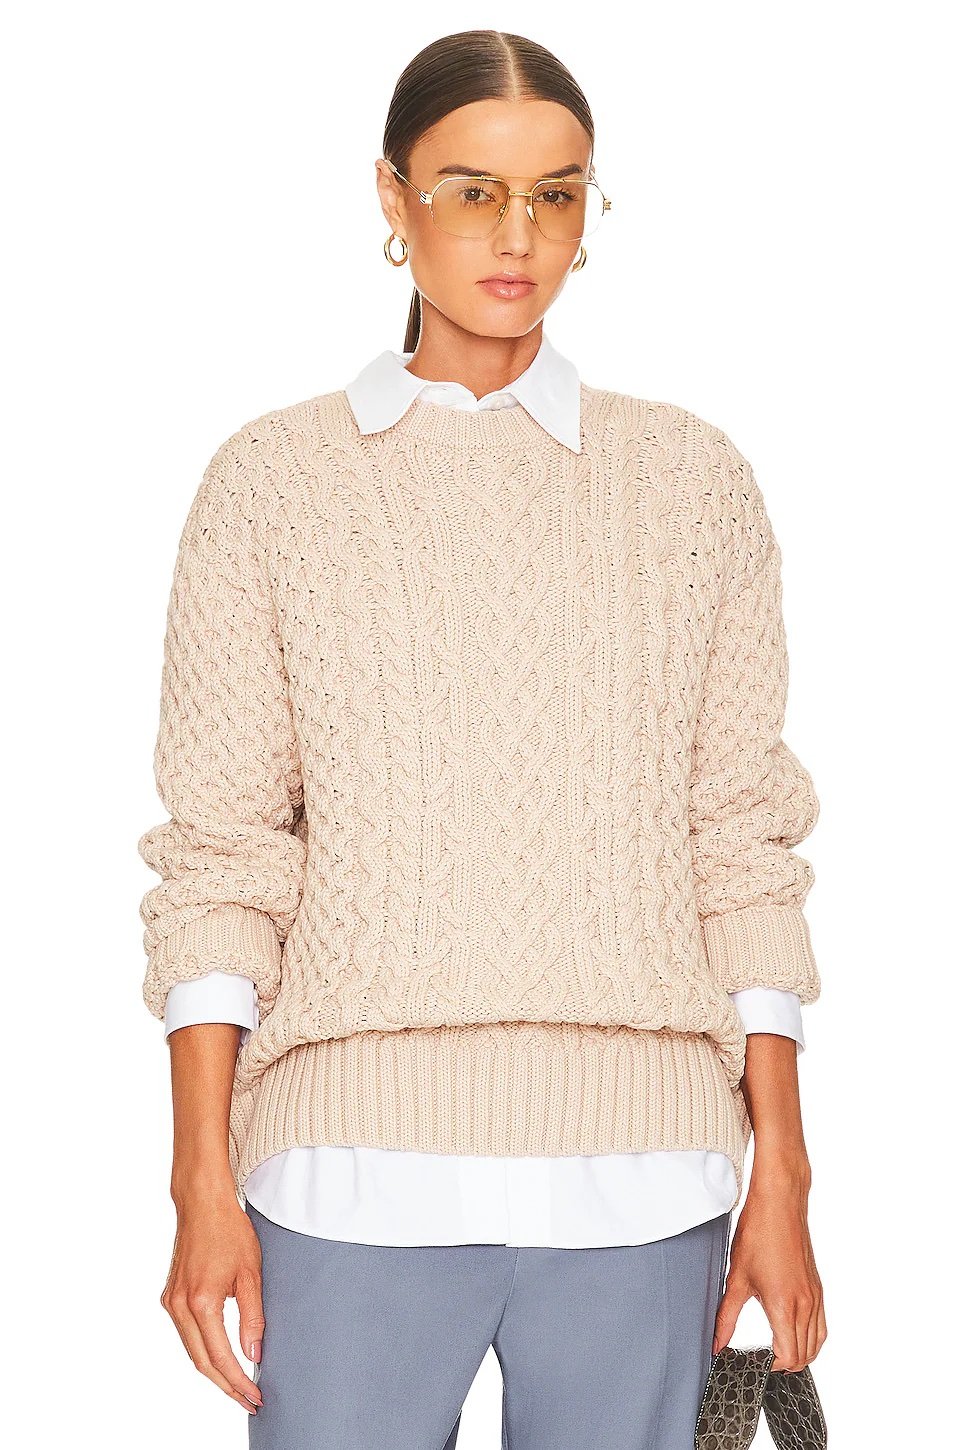 Naara Cable Crew Pullover Song of Style $288